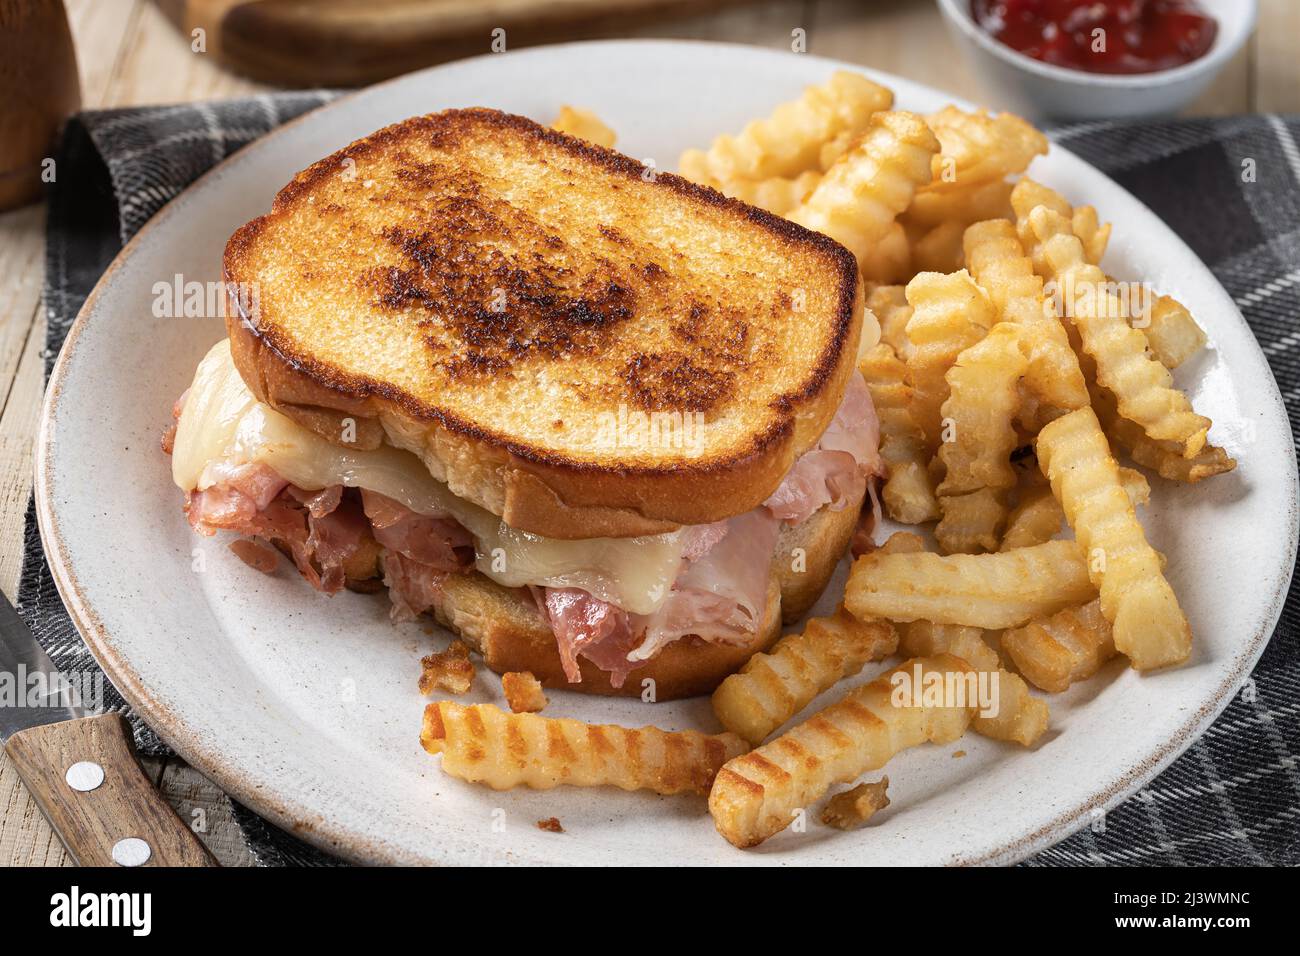 Grilled ham and cheese sandwich and french fries on a plate Stock Photo